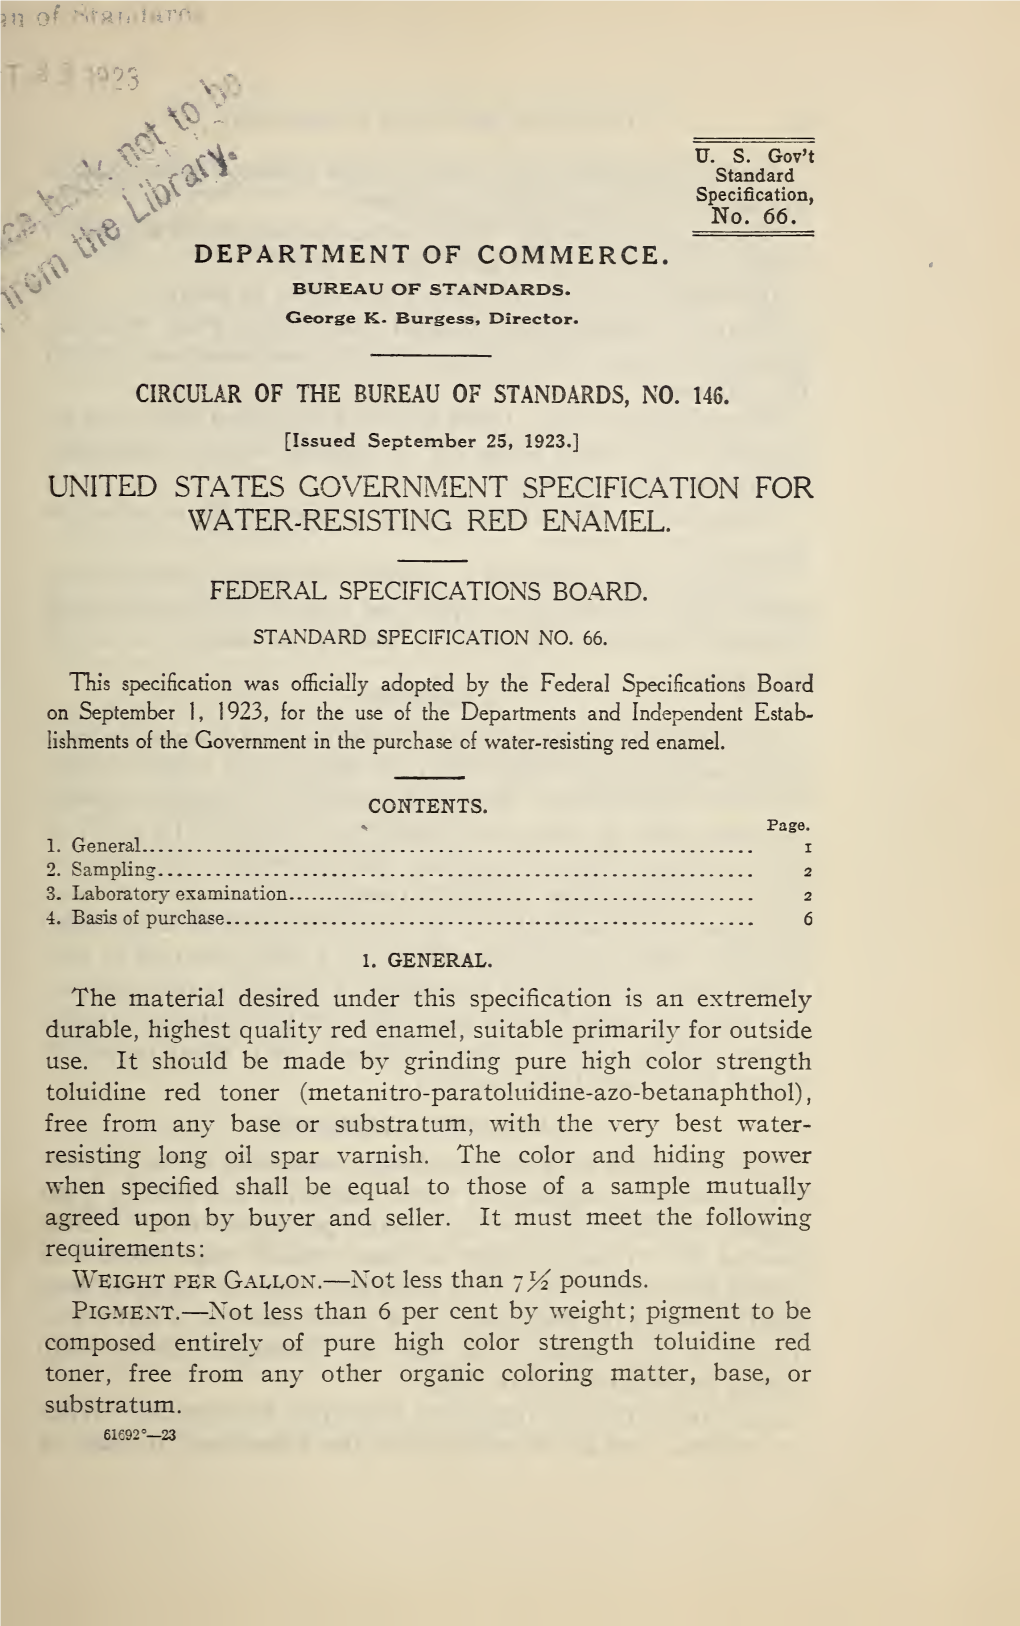 United States Government Specification for Water-Resisting Red Enamel